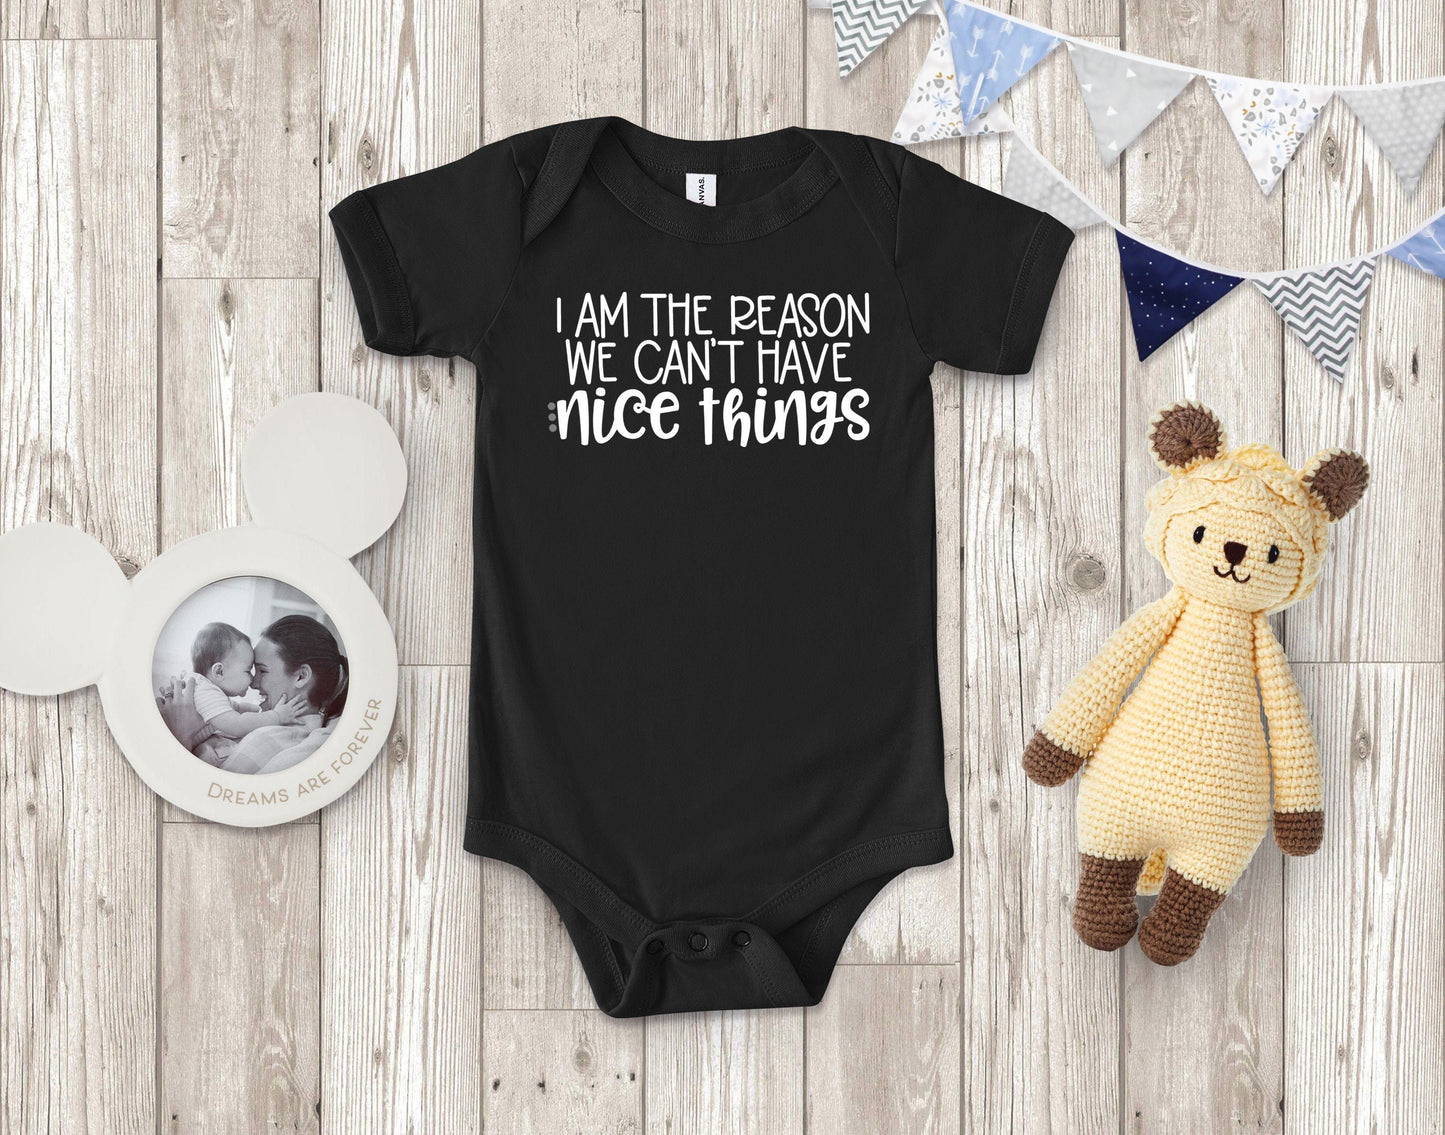 I am the Reason We Can&#39;t Have Nice Things Infant or Youth Shirt or Bodysuit - Funny Baby Bodysuit - Funny Toddler Shirt - Gift for Baby